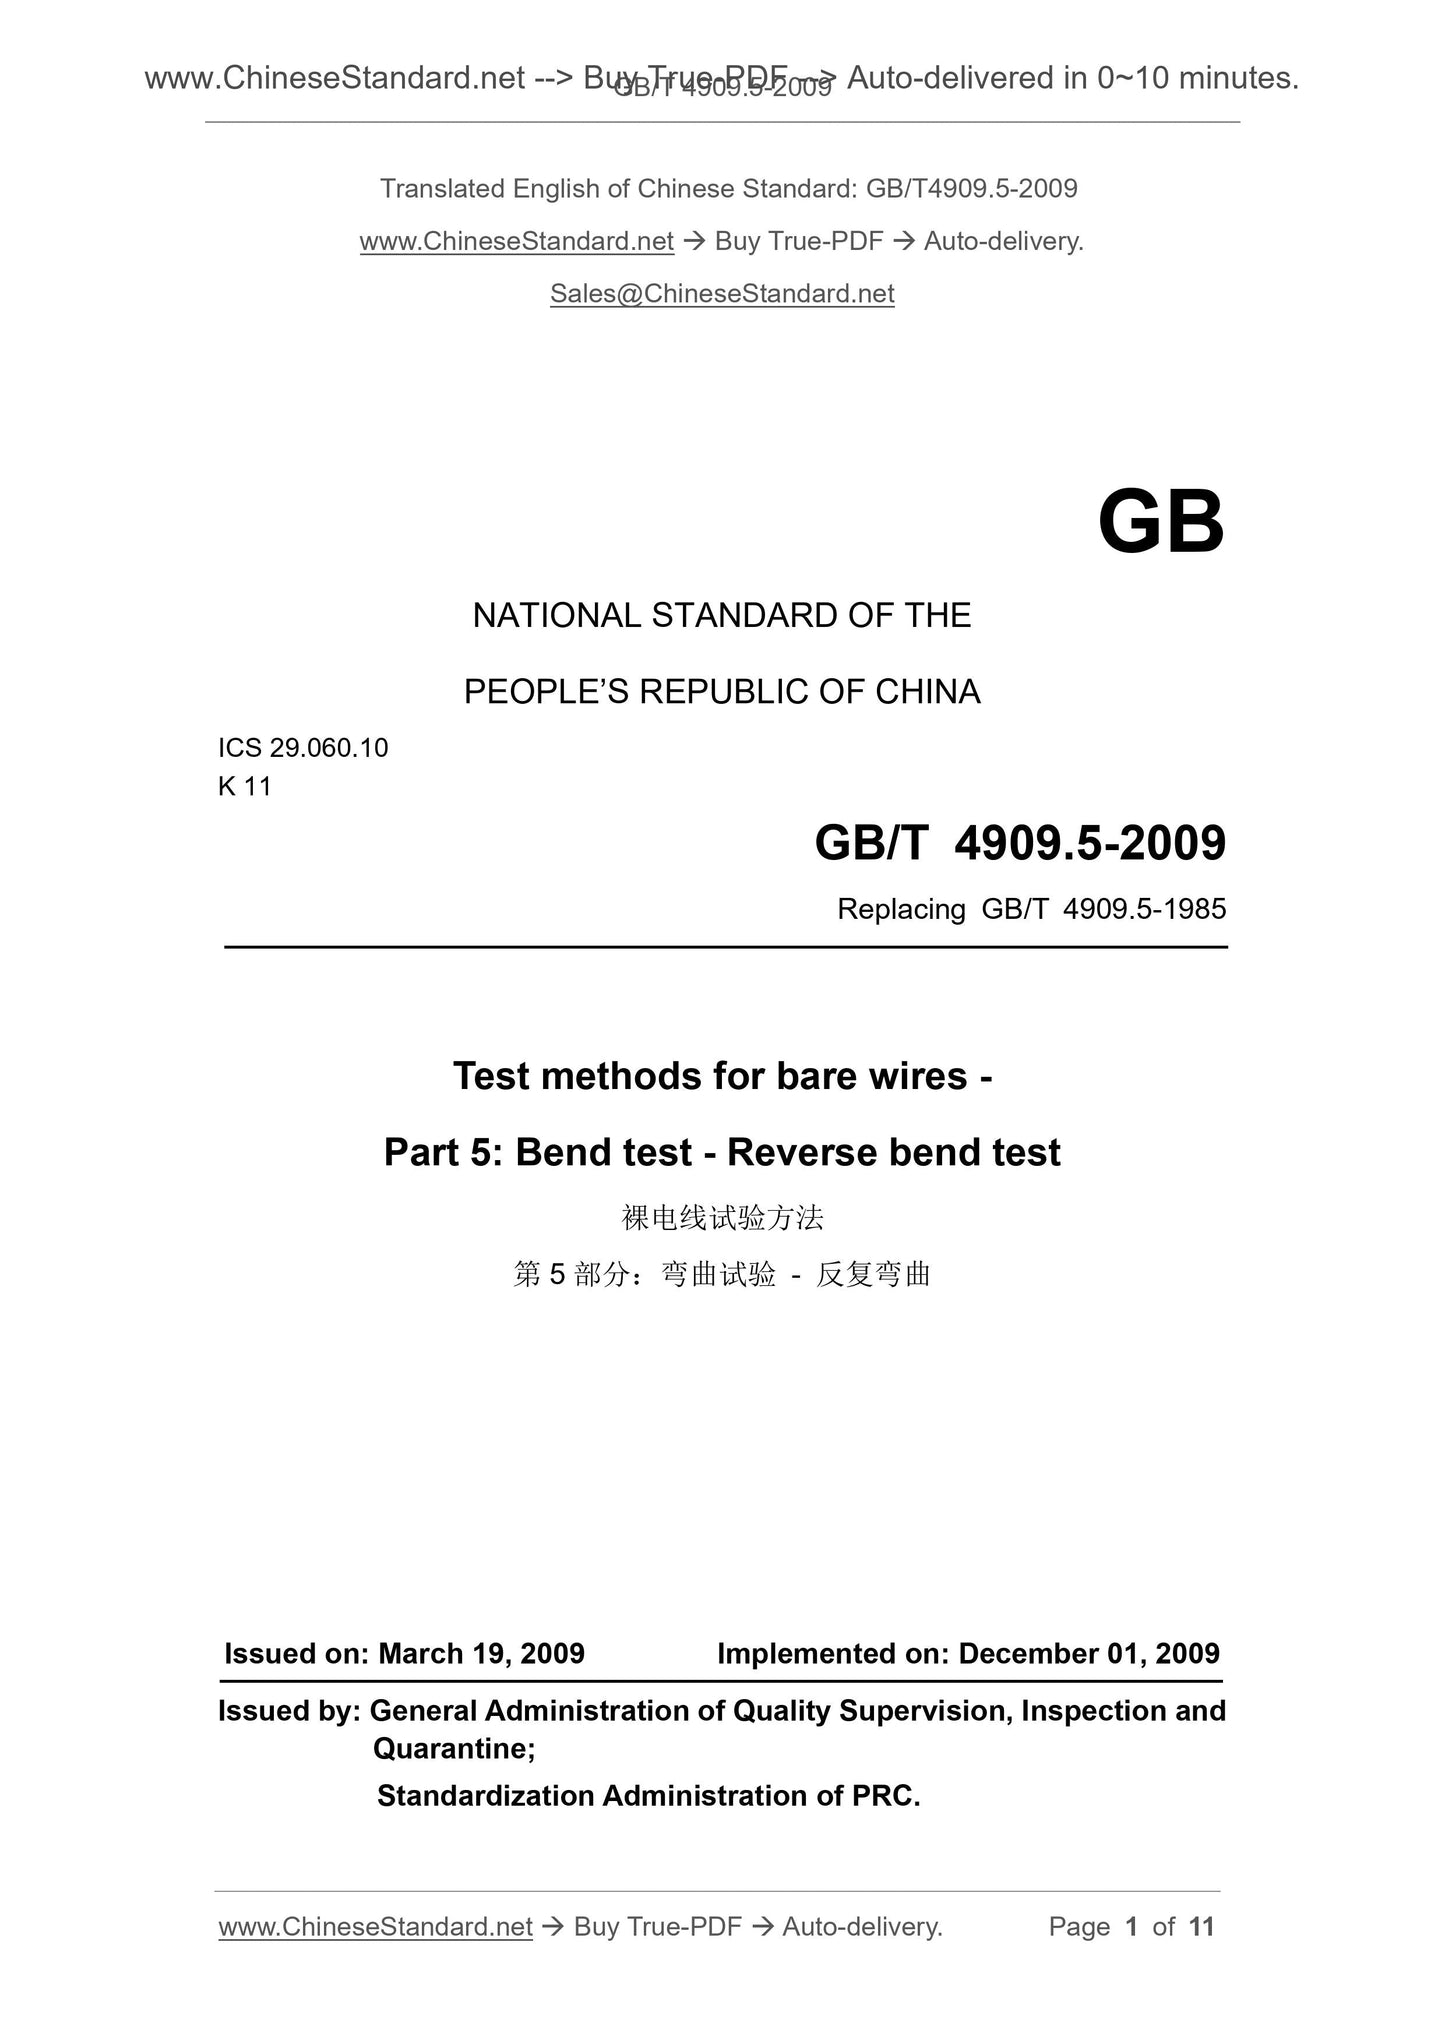 GB/T 4909.5-2009 Page 1